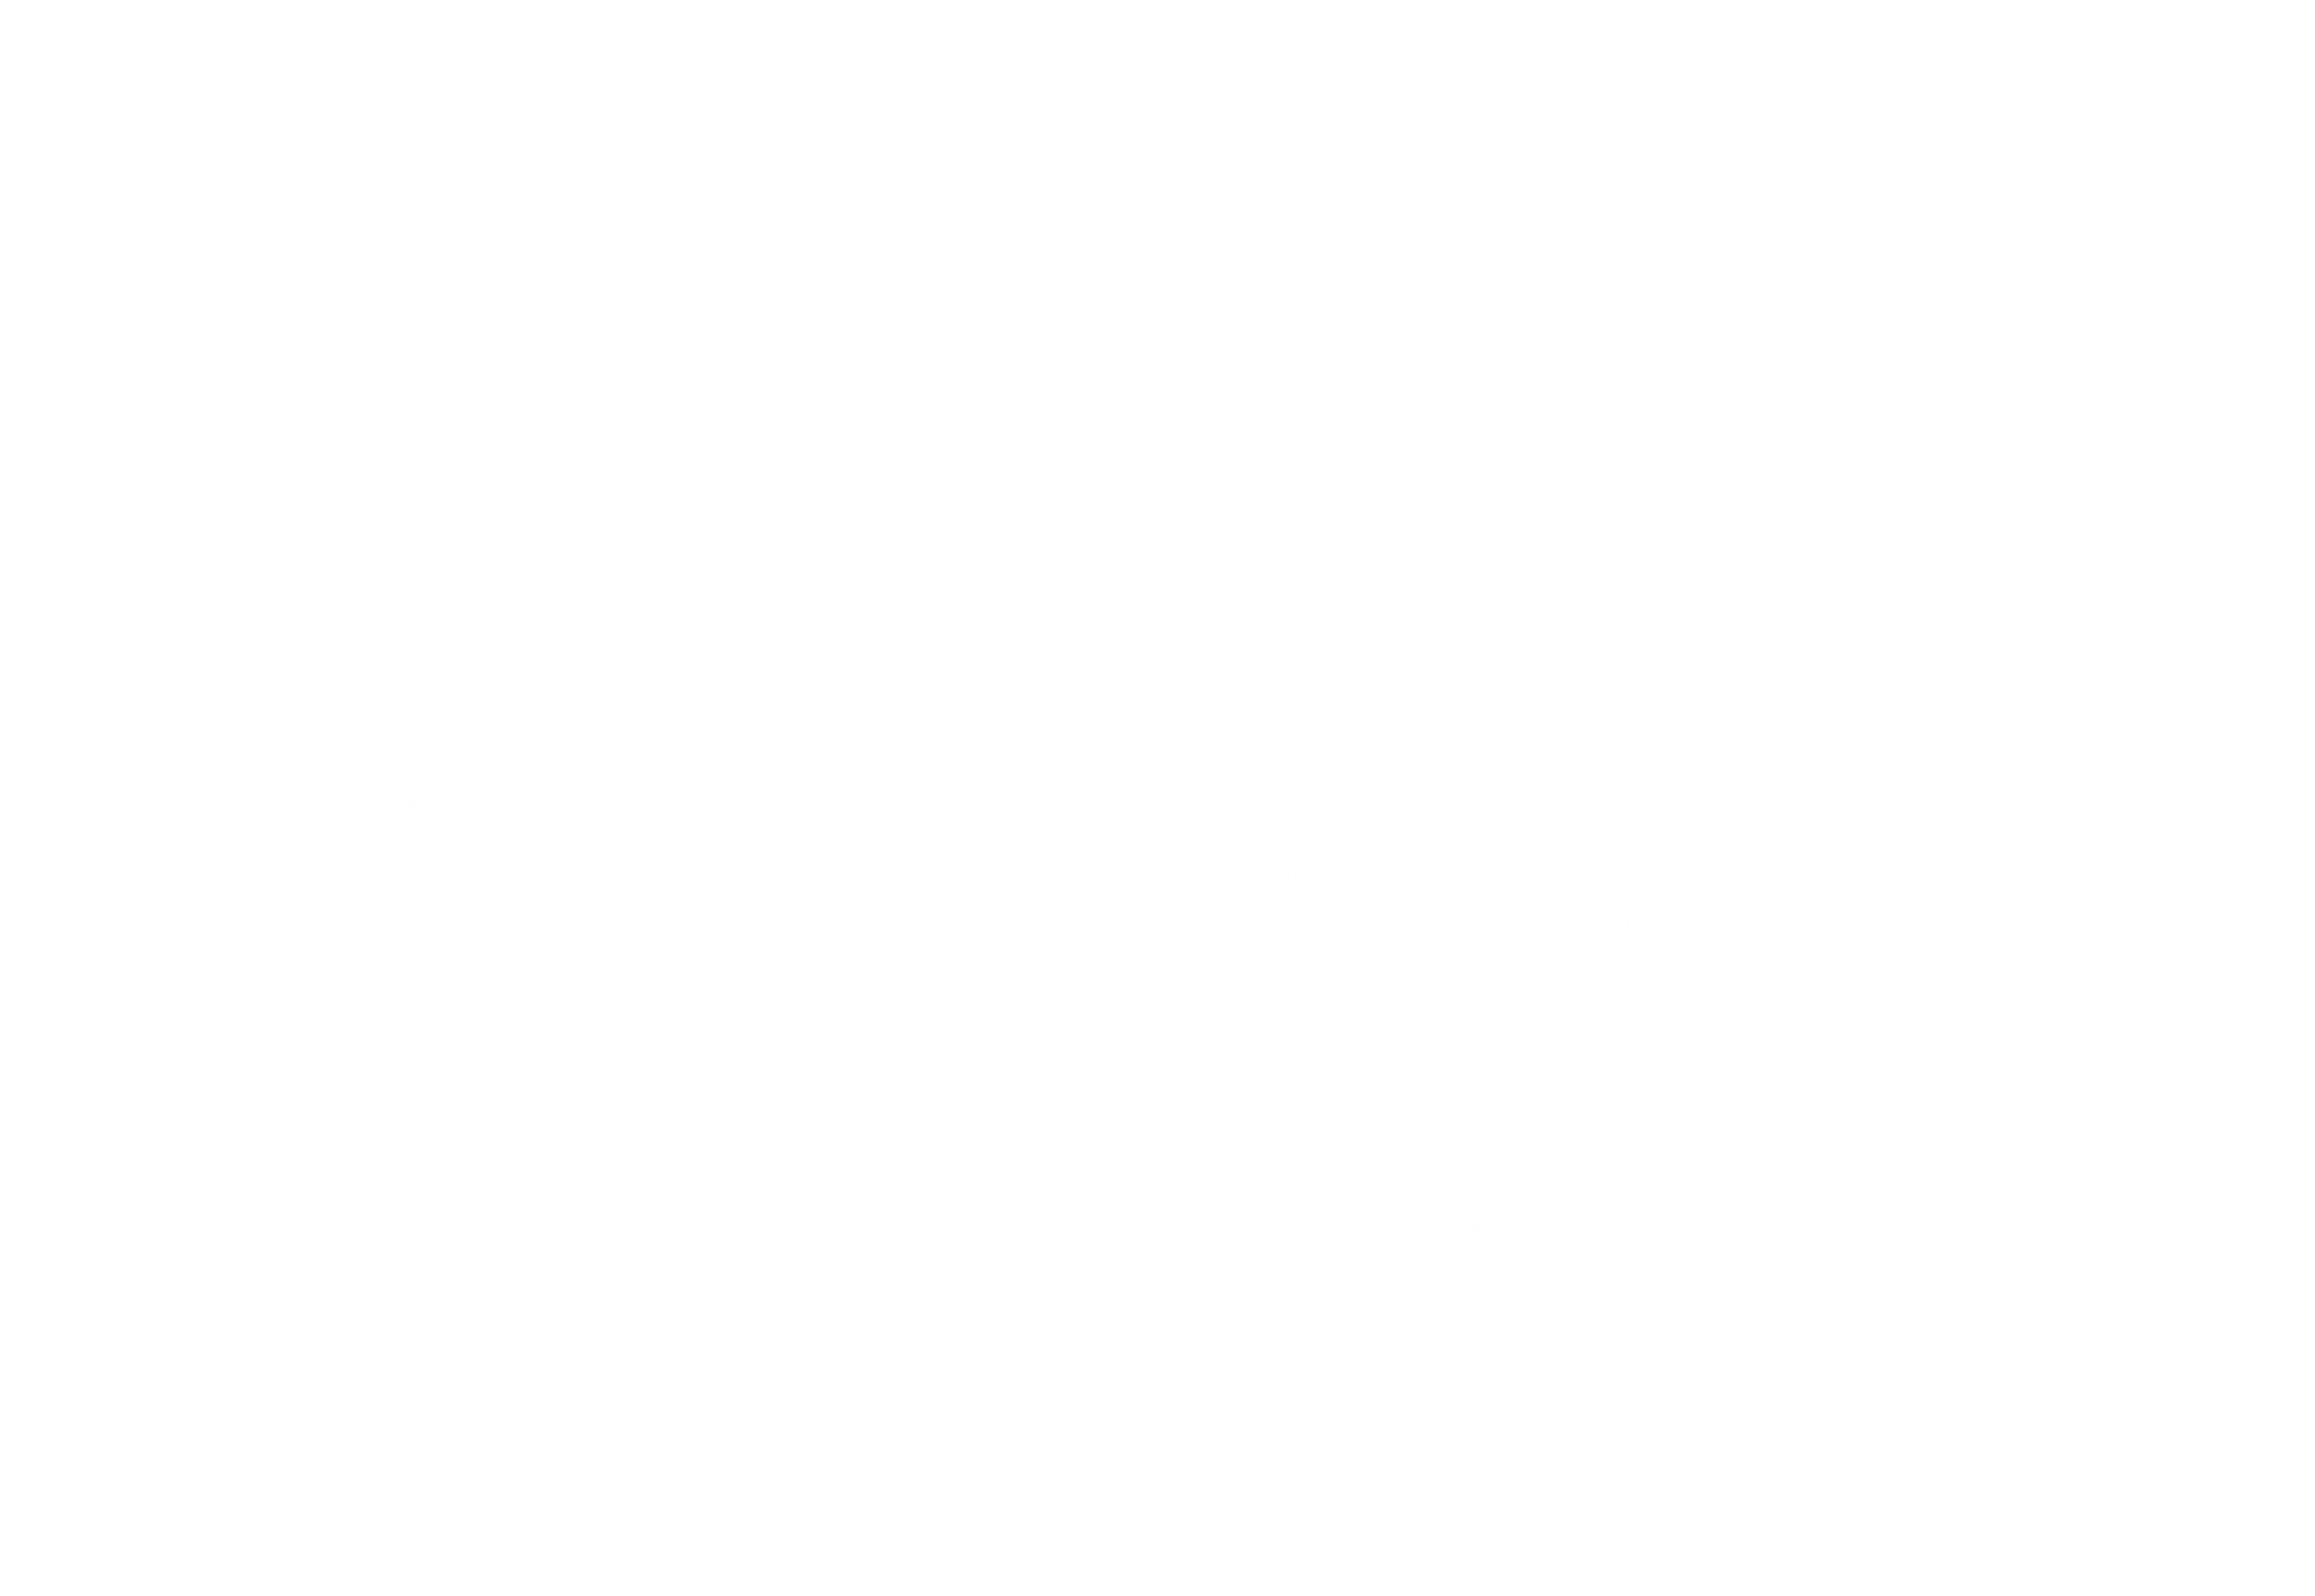 LOVEGOODIMAGES-white.png